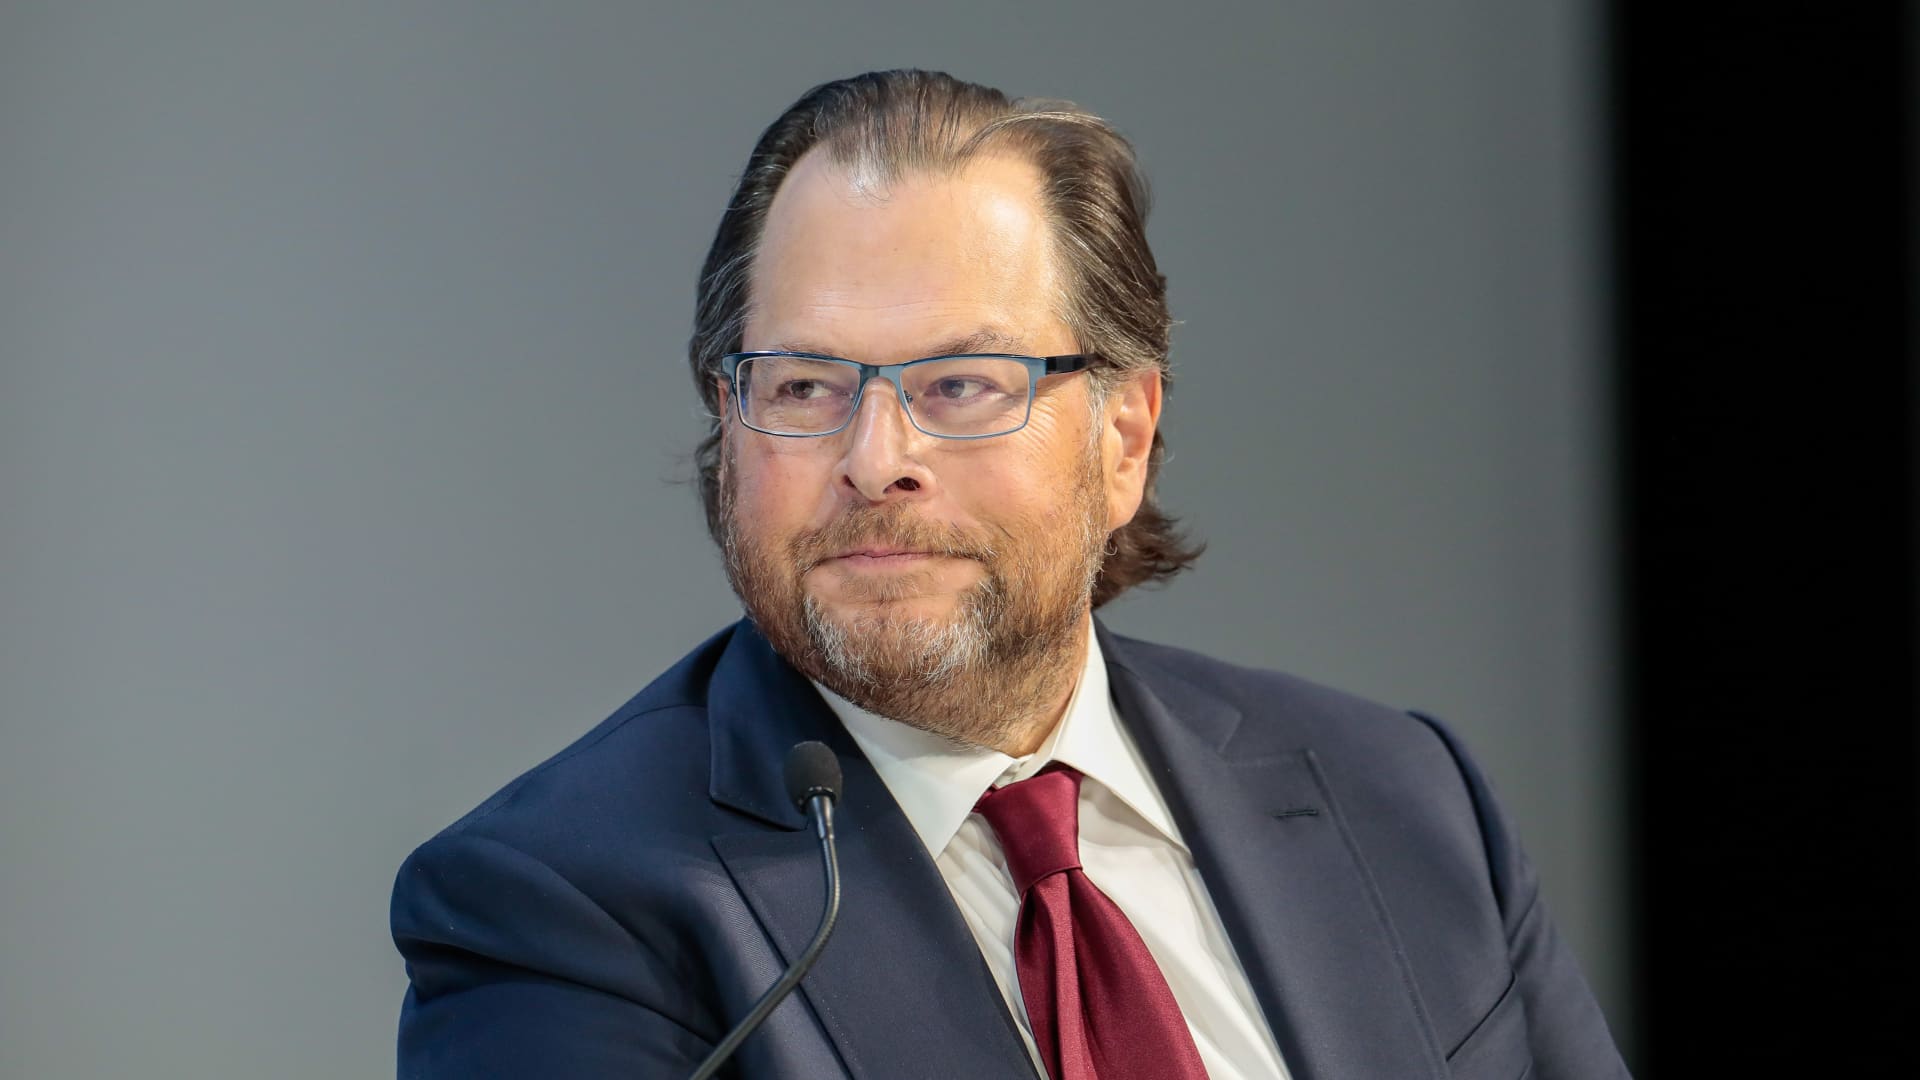 Foreign exchange pushed Salesforce to lower revenue guidance